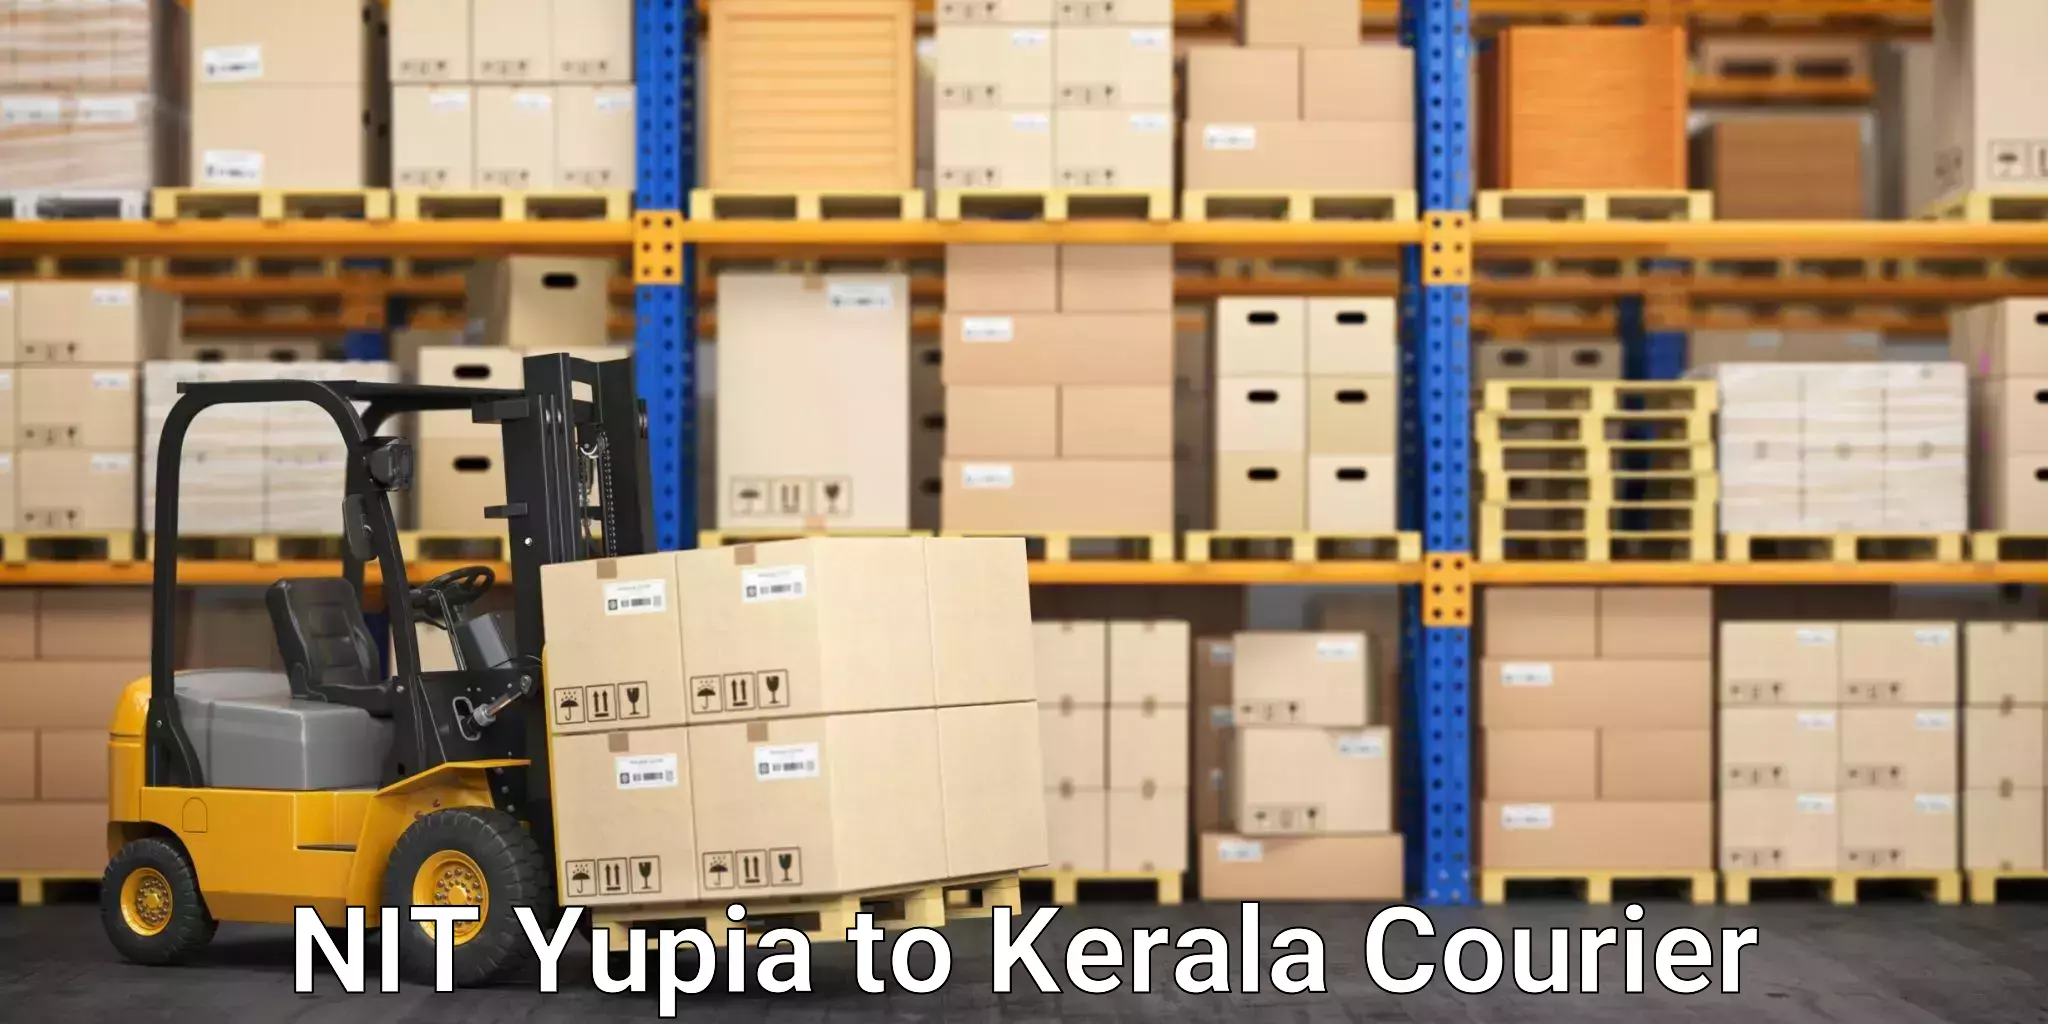 Business delivery service NIT Yupia to Cochin University of Science and Technology